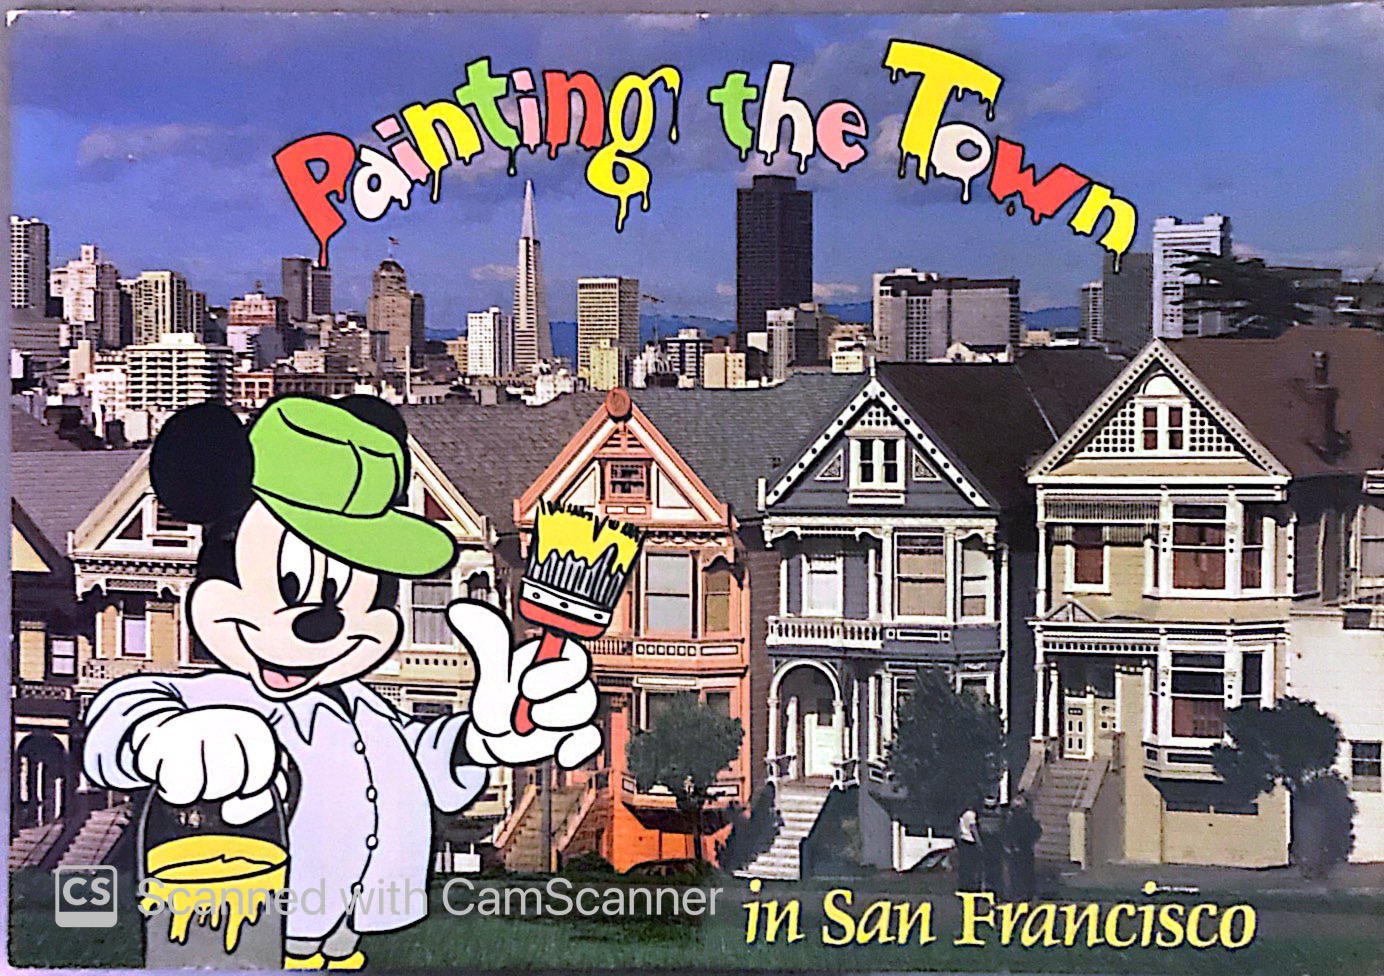 Mickey Mouse with a paintbrush and bucket "Painting the town" of San Francisco